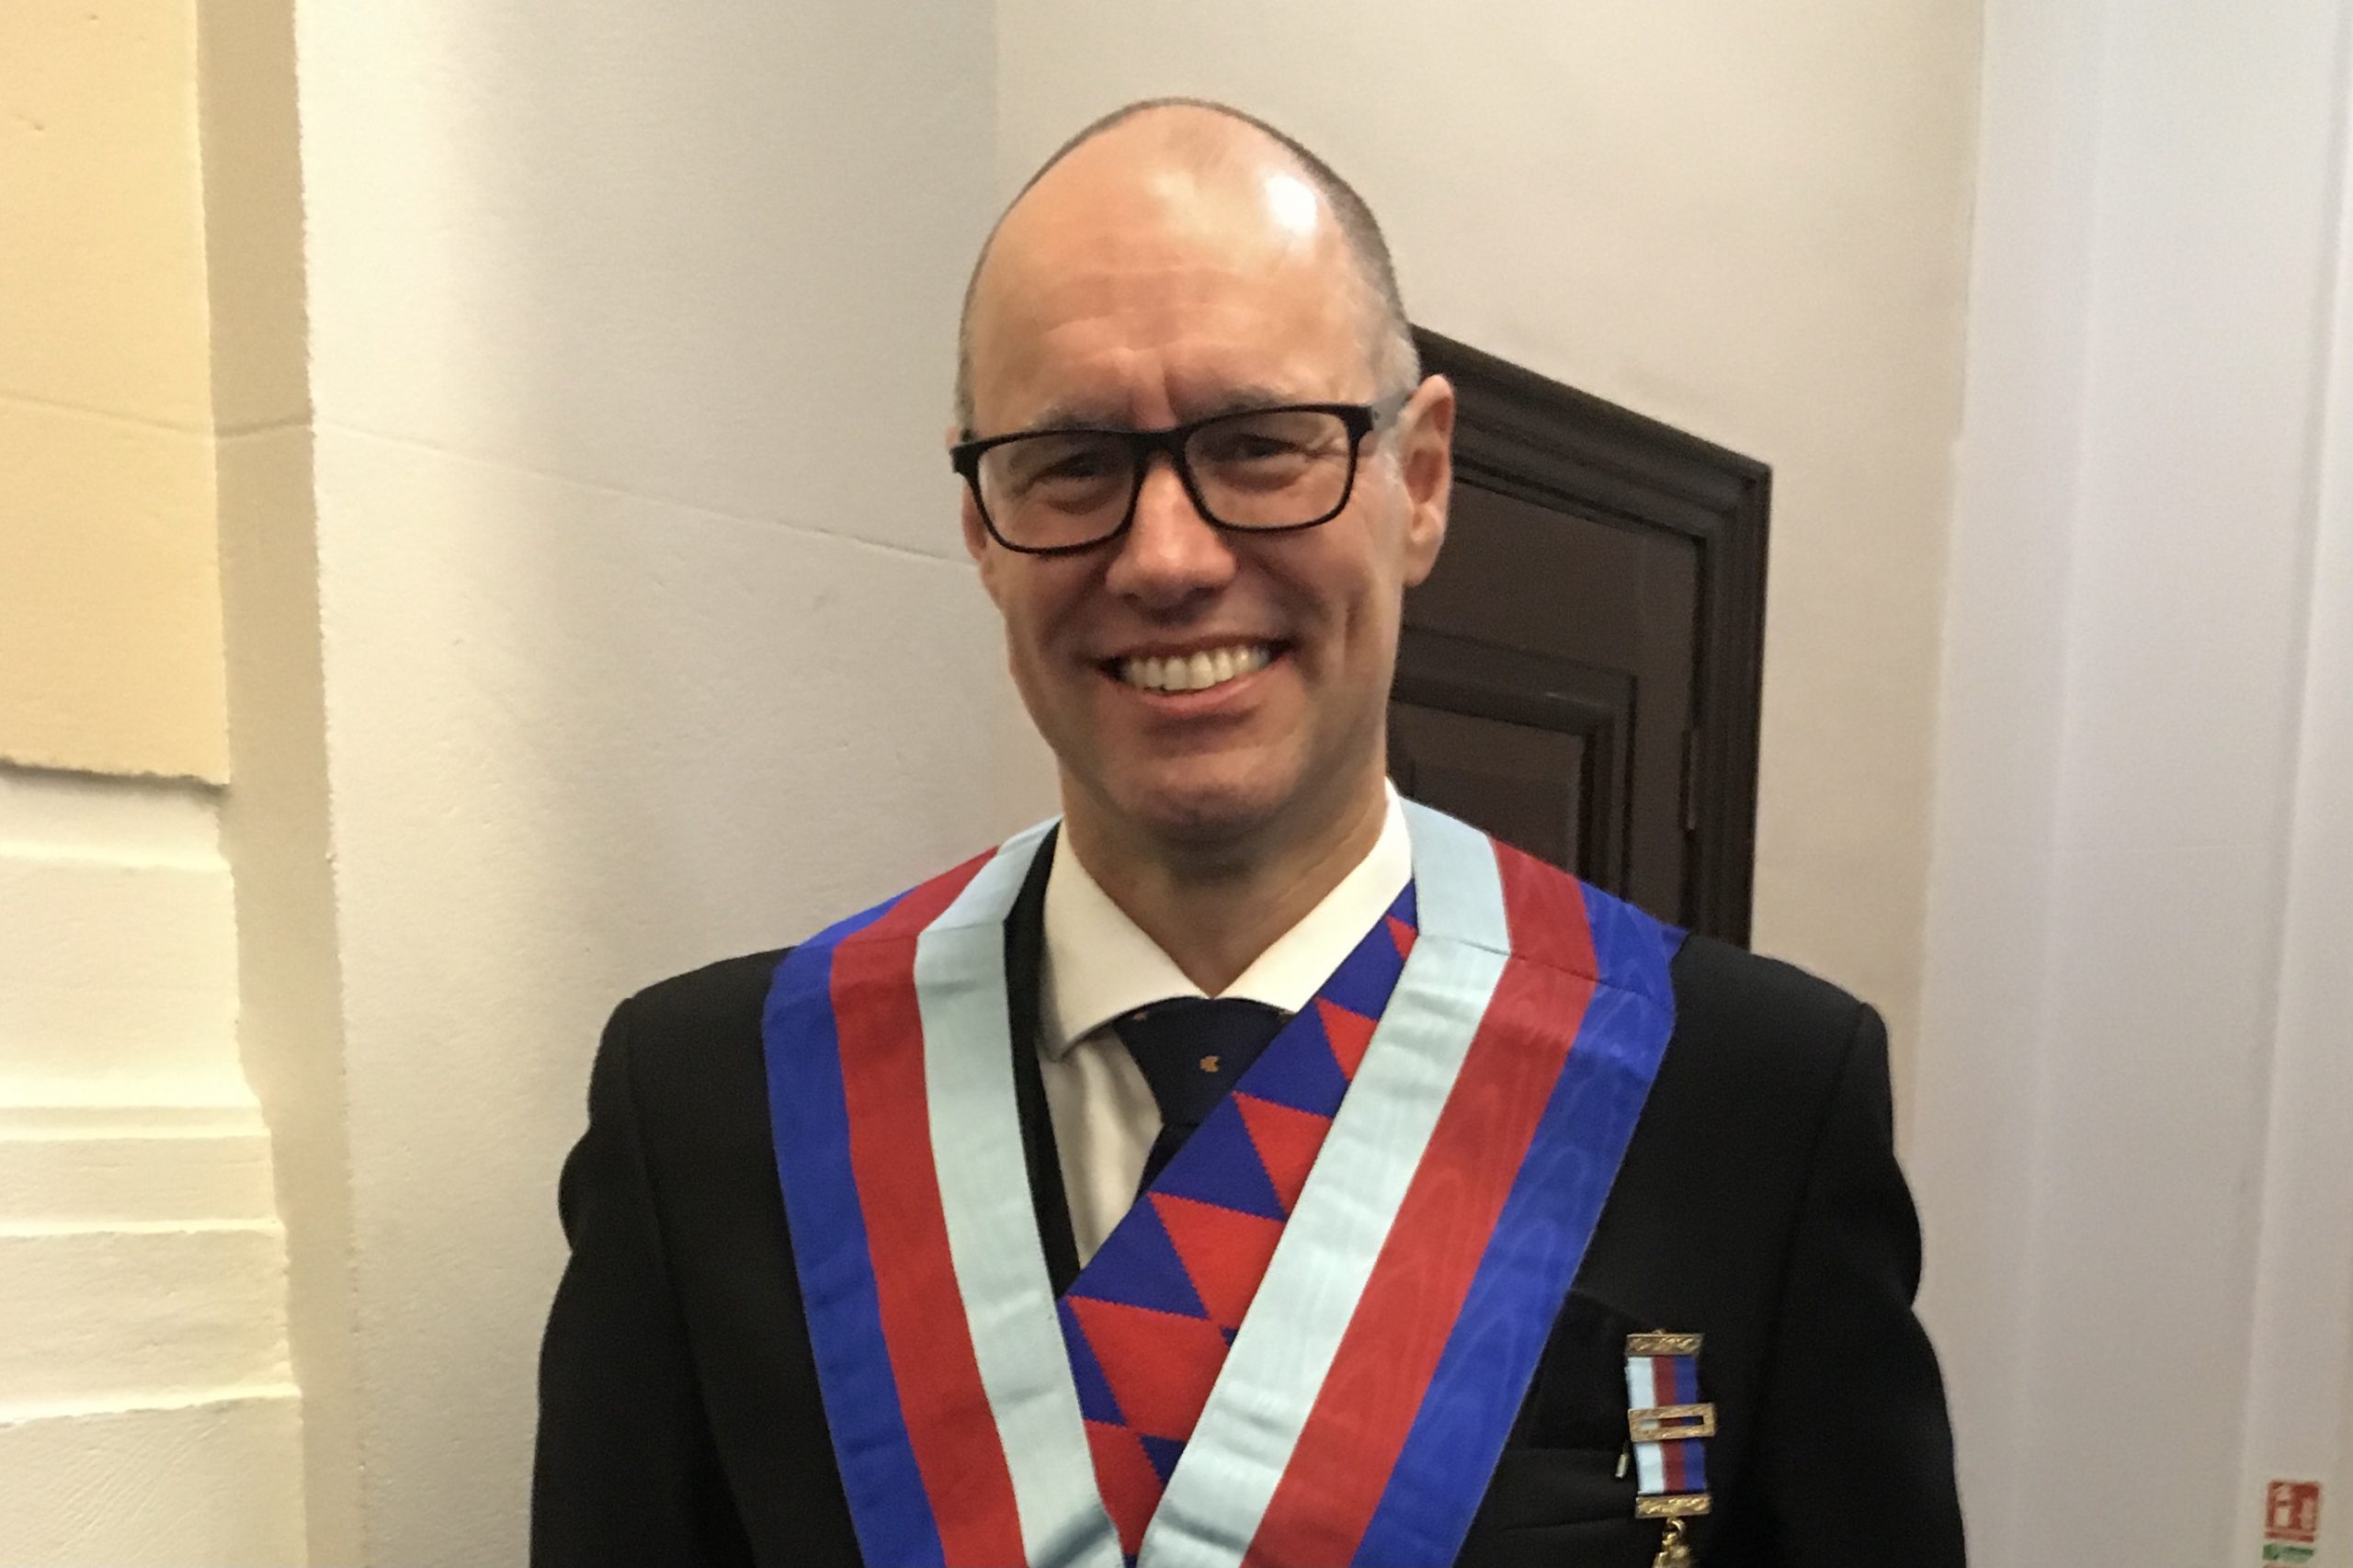 Provincial Communications Officer Appointed for the Royal Arch